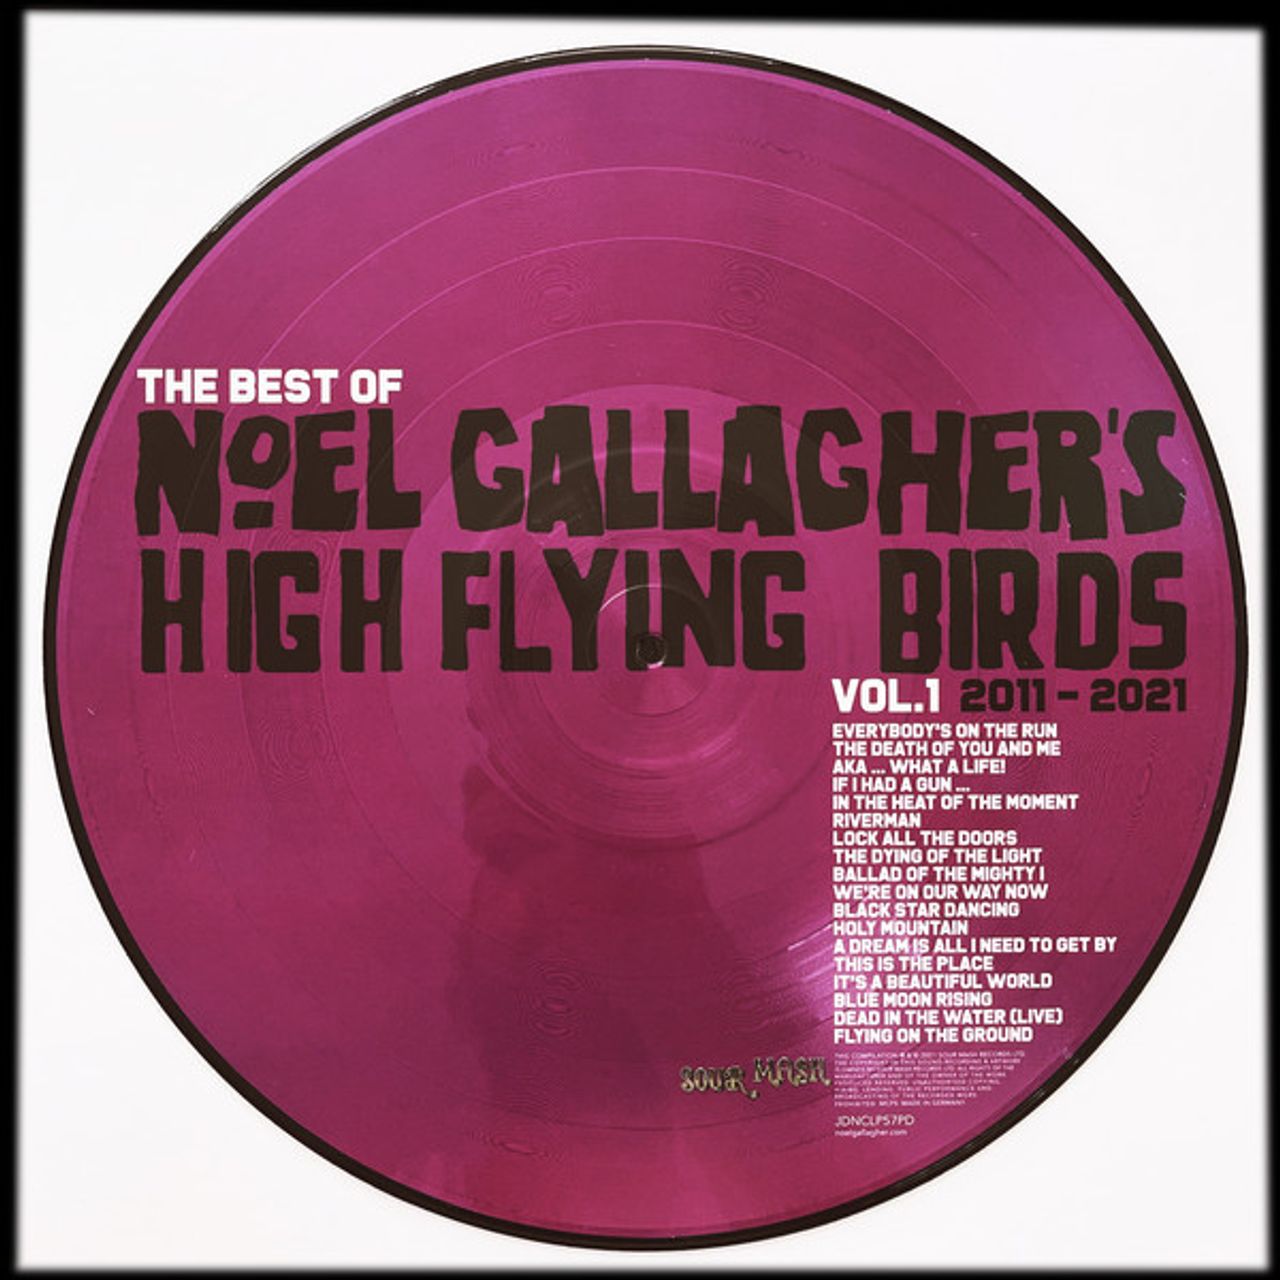 Noel Gallagher Back The Way We Came Vol. 1 2011-2021 UK picture disc LP (vinyl picture disc album)